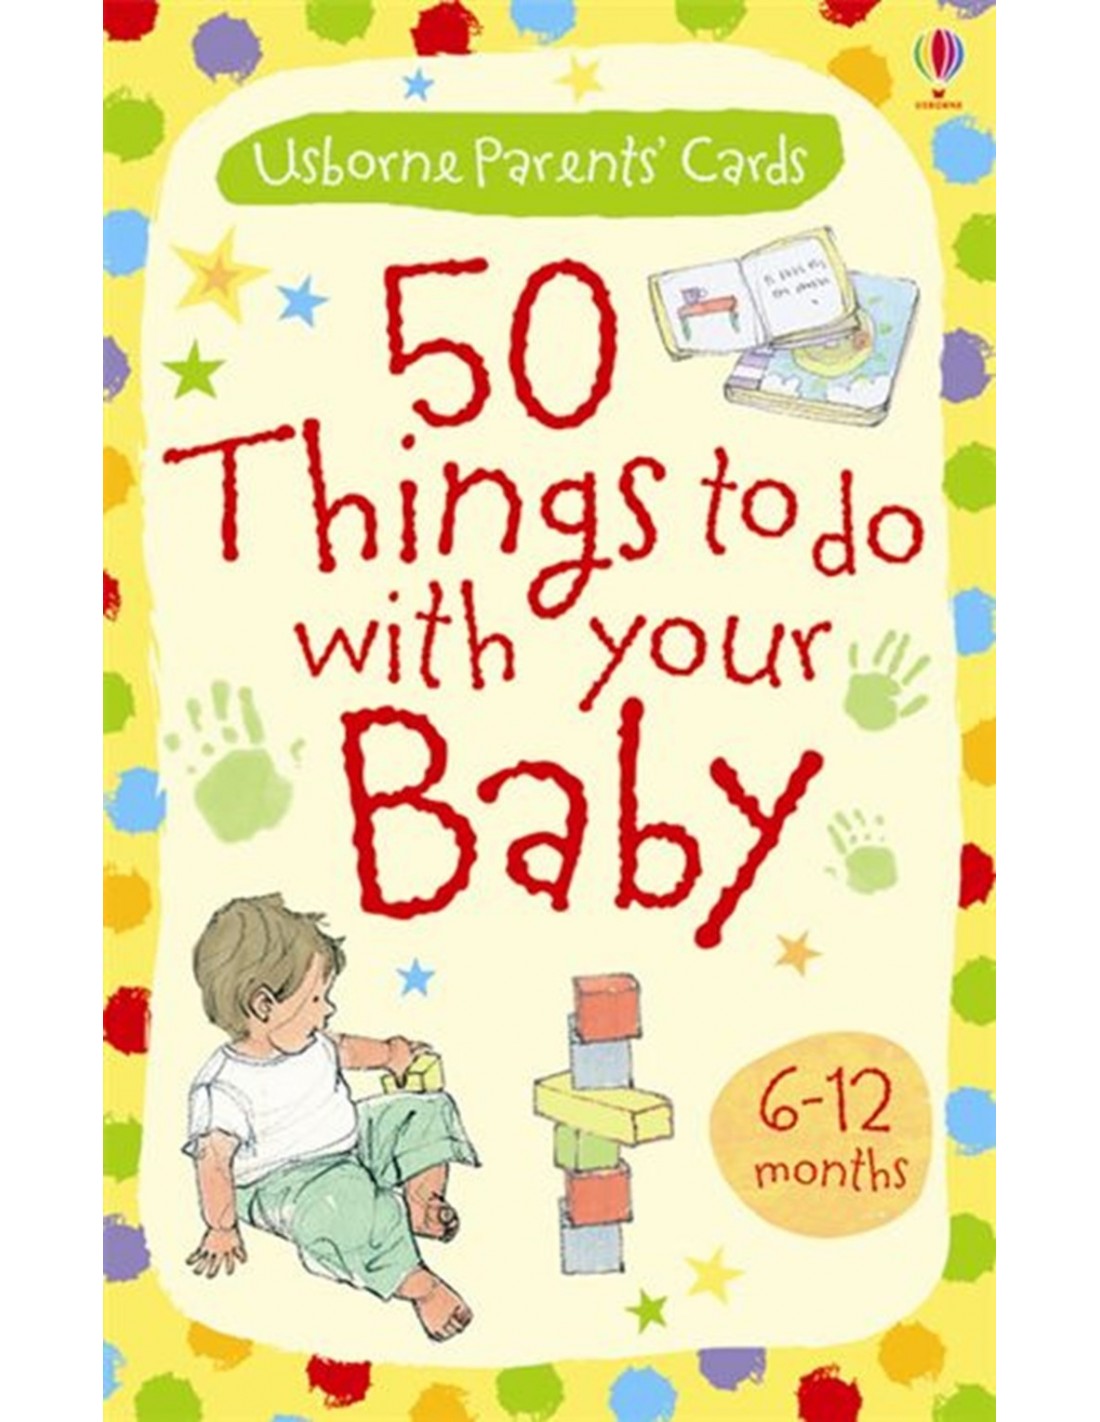 50 things to do with your baby: 6-12 months